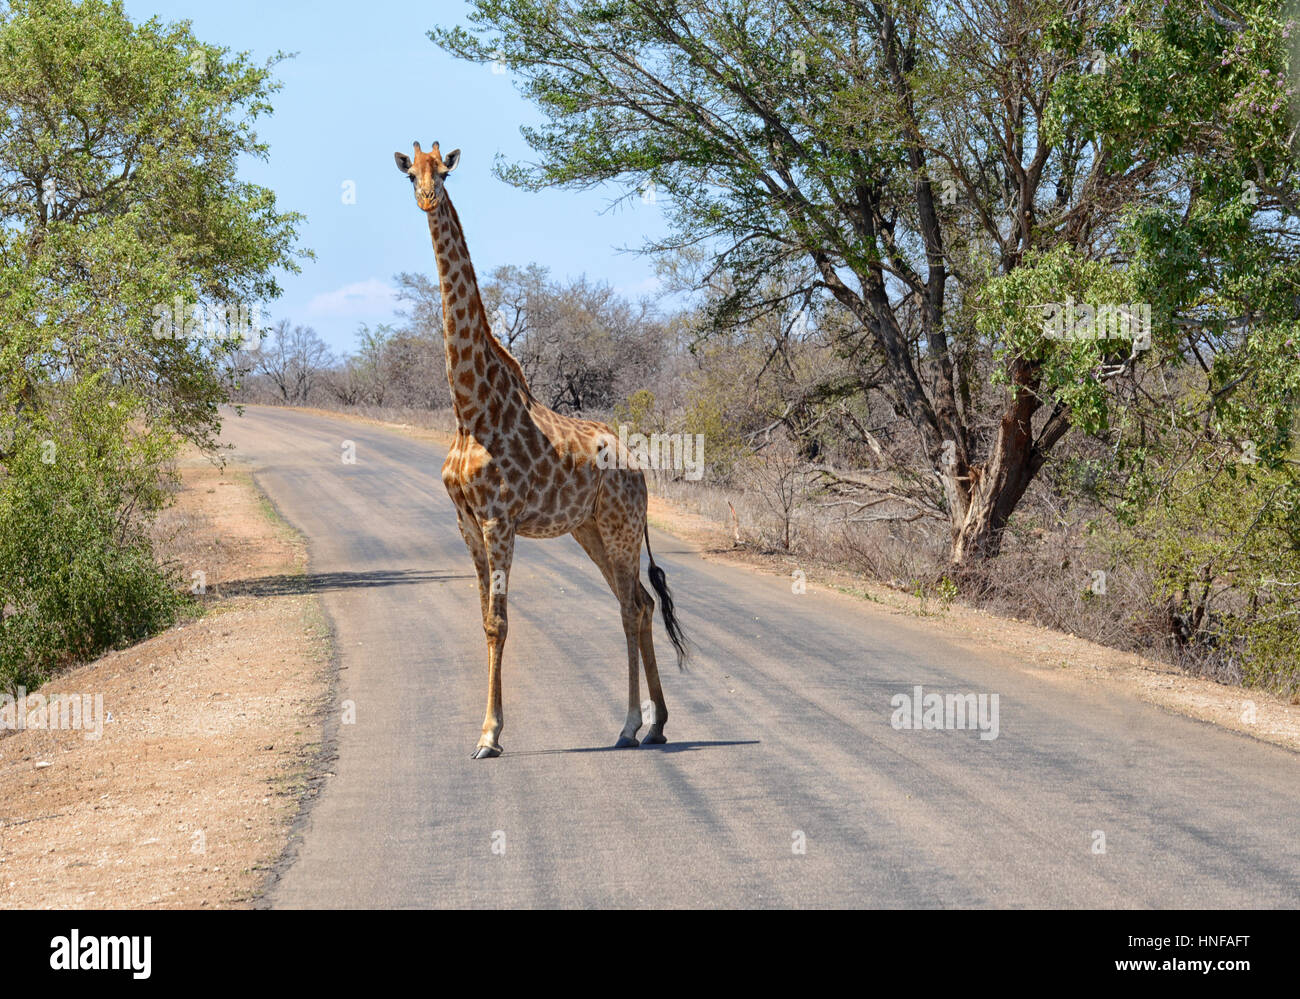 Giraffe in South Africa's Kruger National Park walking across a road Stock Photo